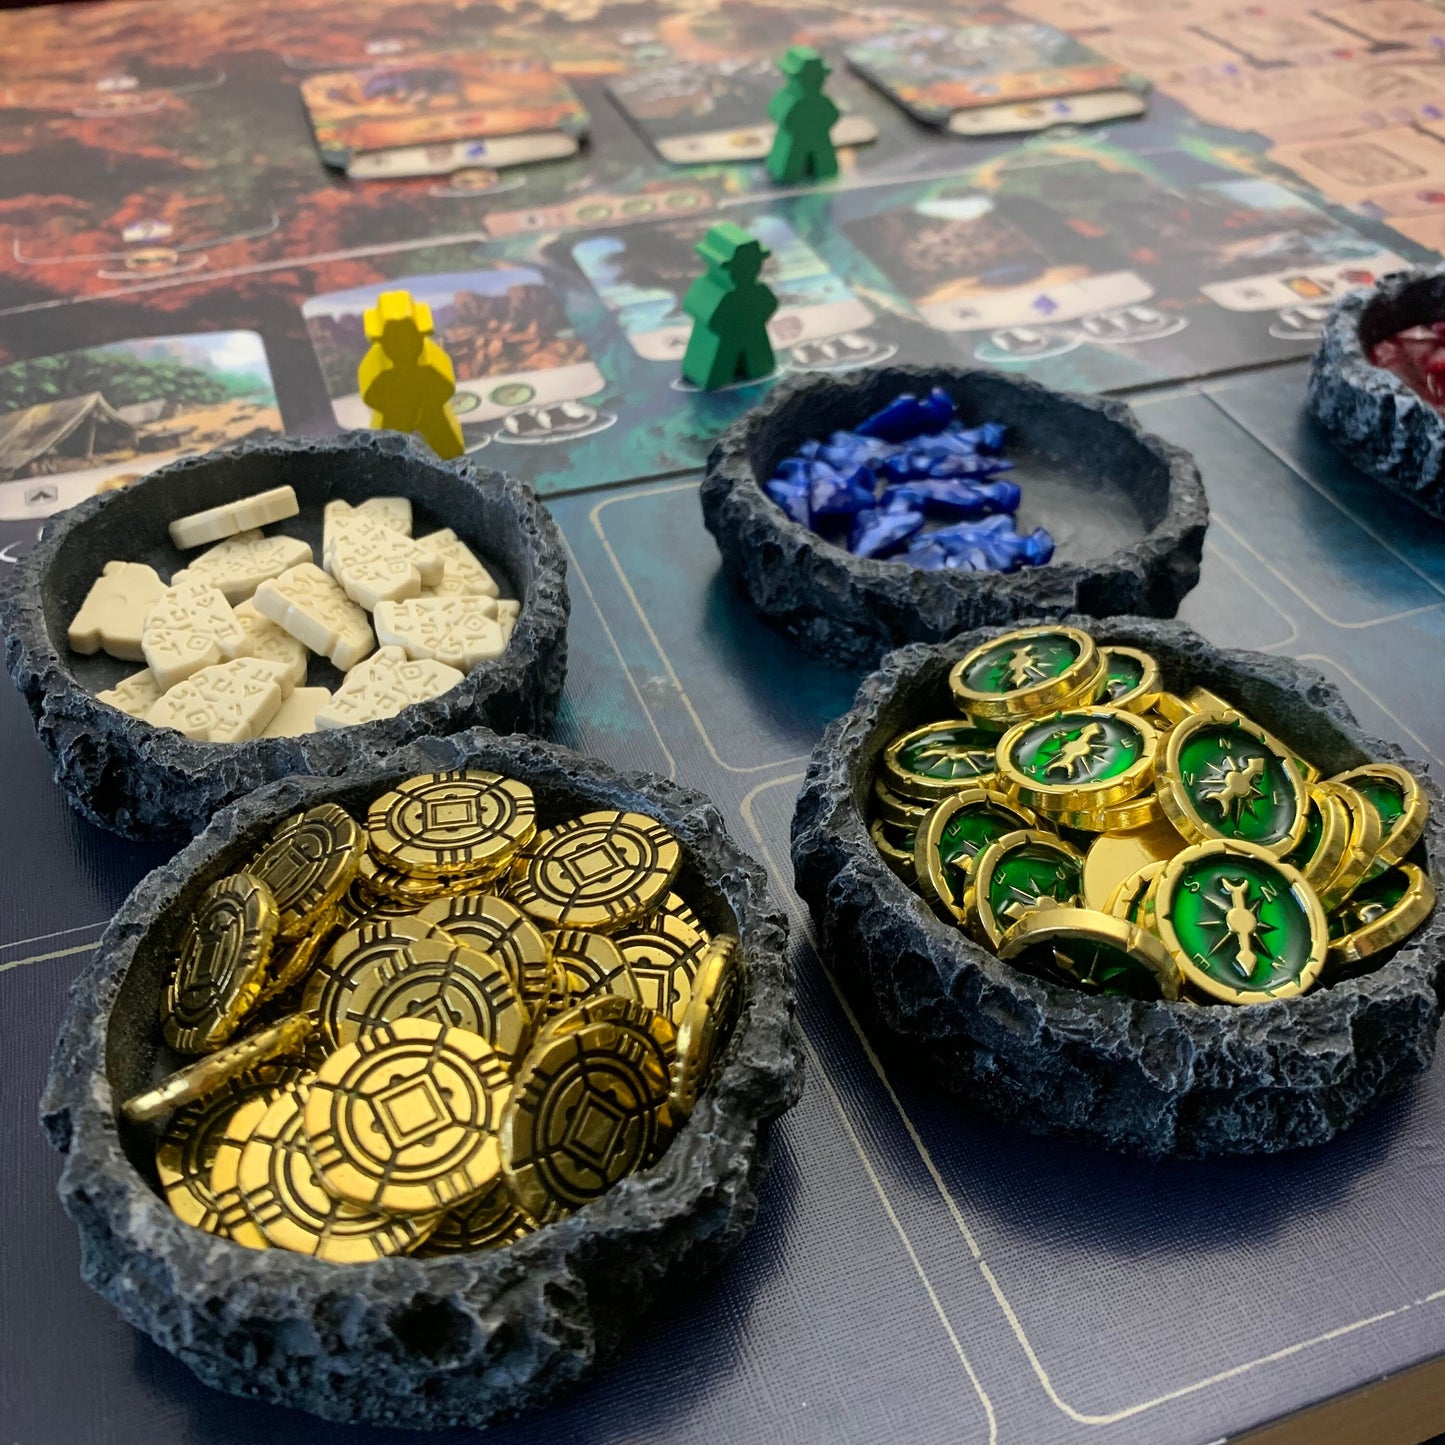 60 Metal Lost Ruins of Arnak Token Upgrade - Gold Coin and Compass, Expedition Map Token, Scythe Encounter Tokens